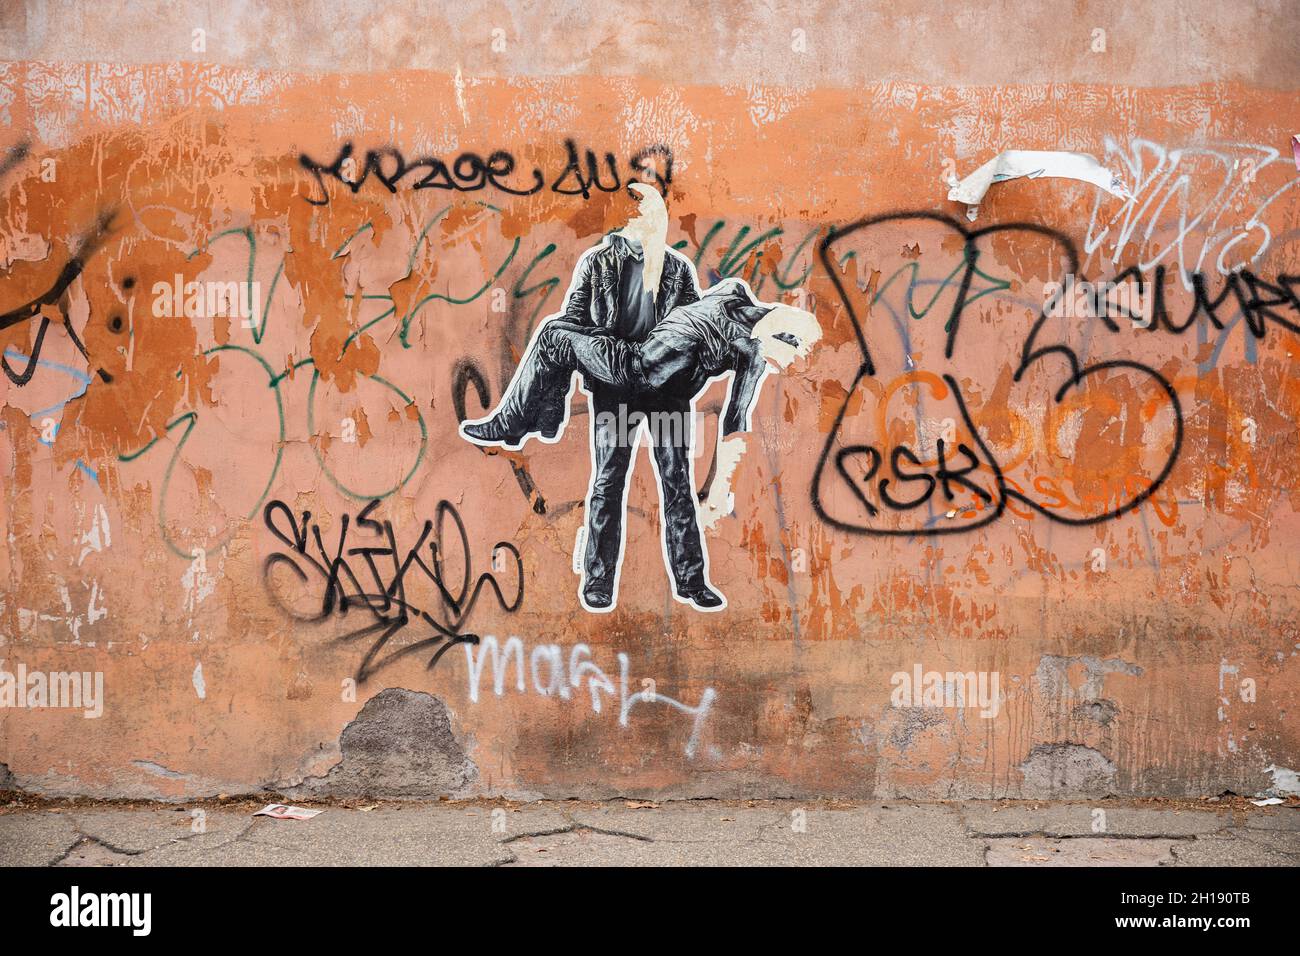 Street art. Torn cut-to-shape paste-up posters in Trastevere district of Rome, Italy. Stock Photo